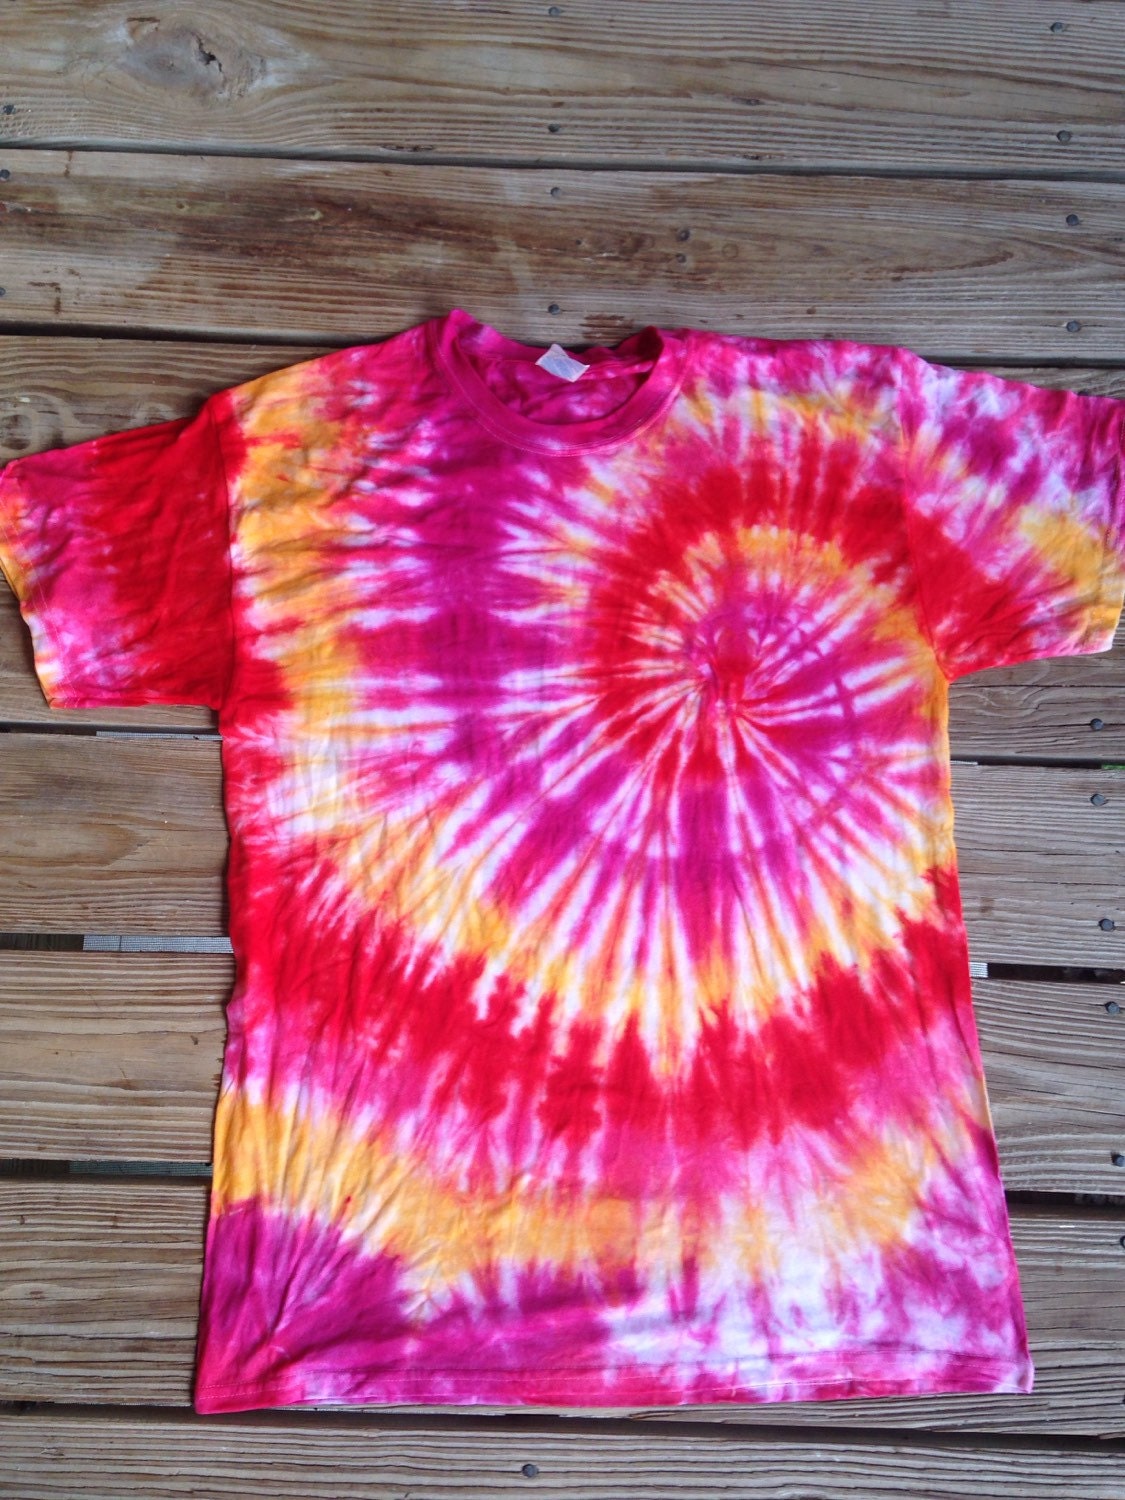 Spiral tie dye shirt custom made heavy cotton by HippiesLife